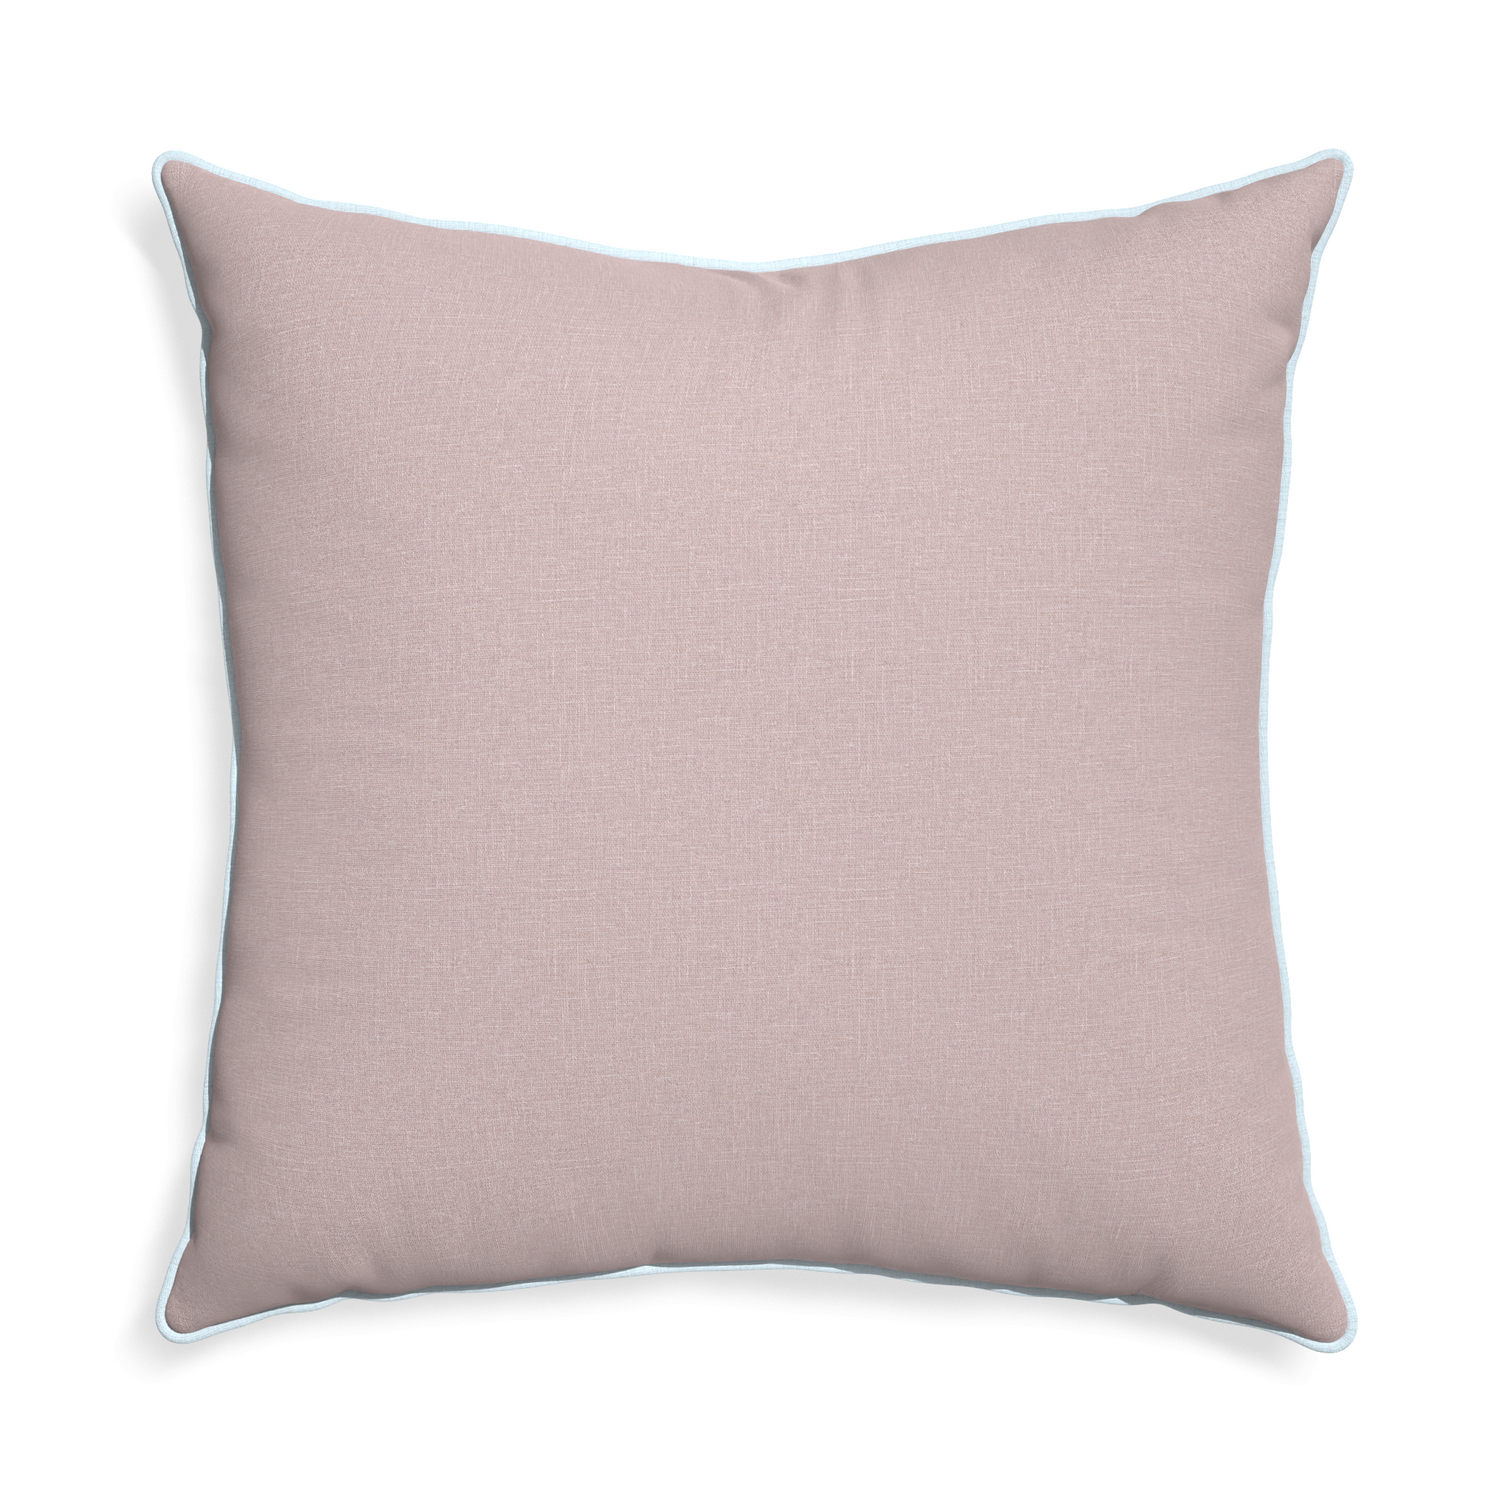 Euro-sham orchid custom mauve pinkpillow with powder piping on white background